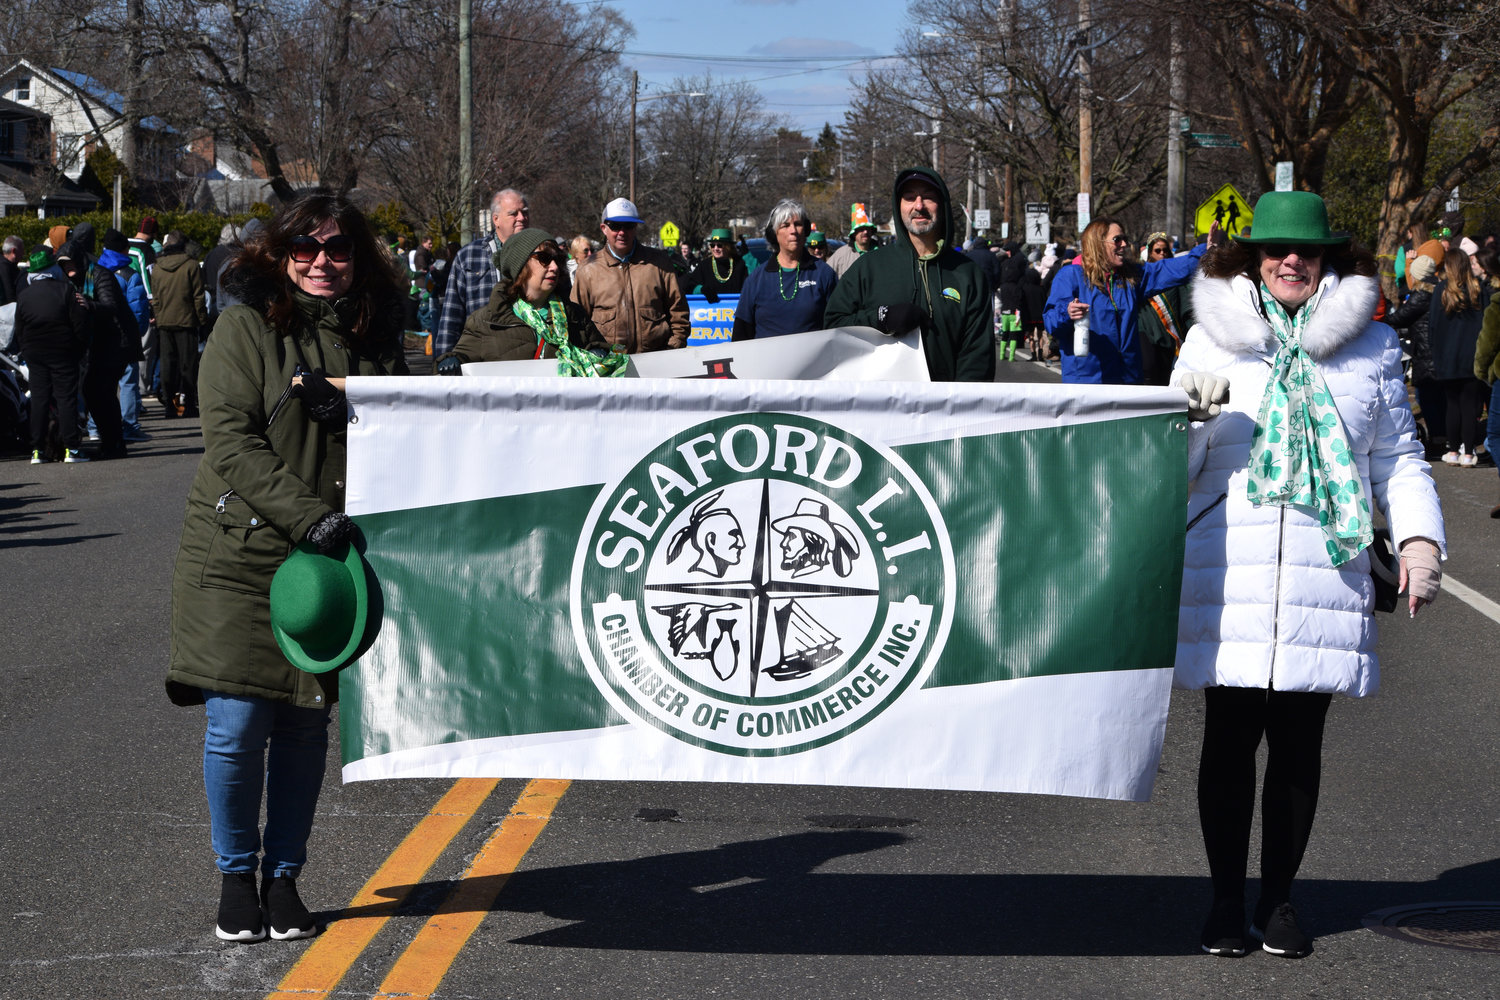 The Seaford Chamber of Commerce was one of the many organizations from the greater Wantagh-Seaford area to join in the festivities of the Wantagh St. Patrick’s Day parade. Chamber Vice President Donna Jebaily and President Margaret Grub proudly marched down Wantagh Avenue with the chamber banner.